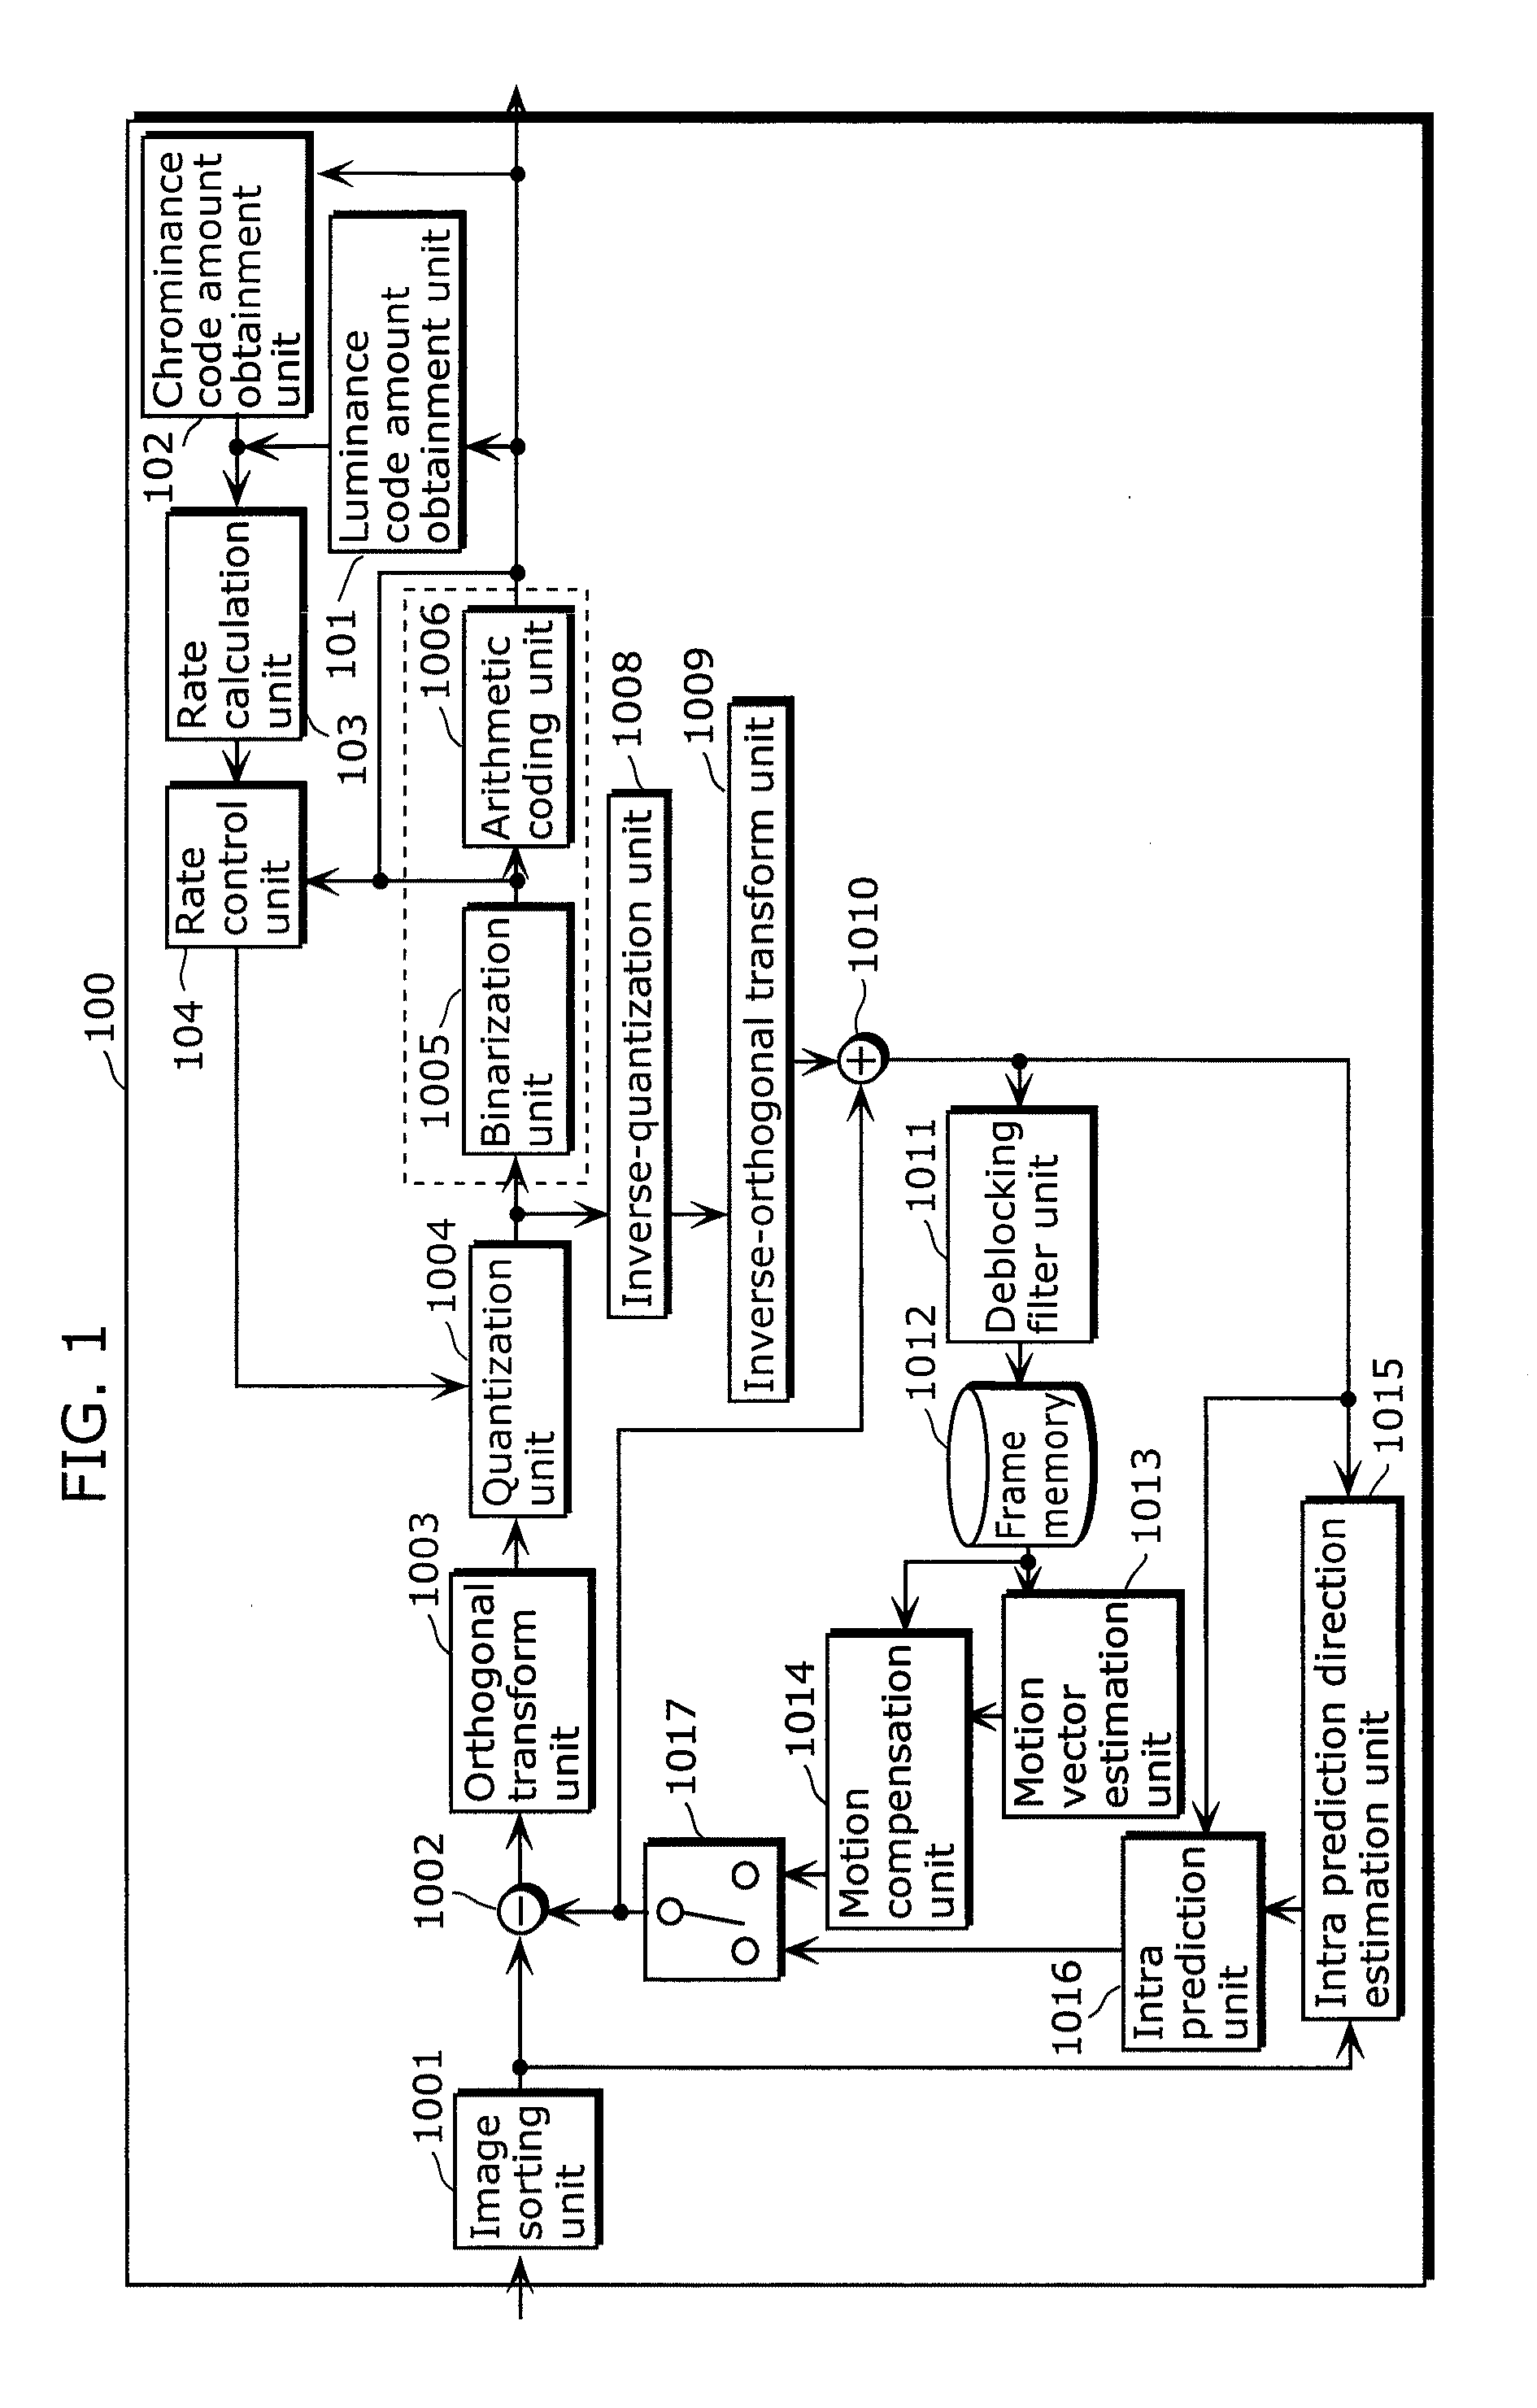 Video signal coding apparatus and video signal coding method